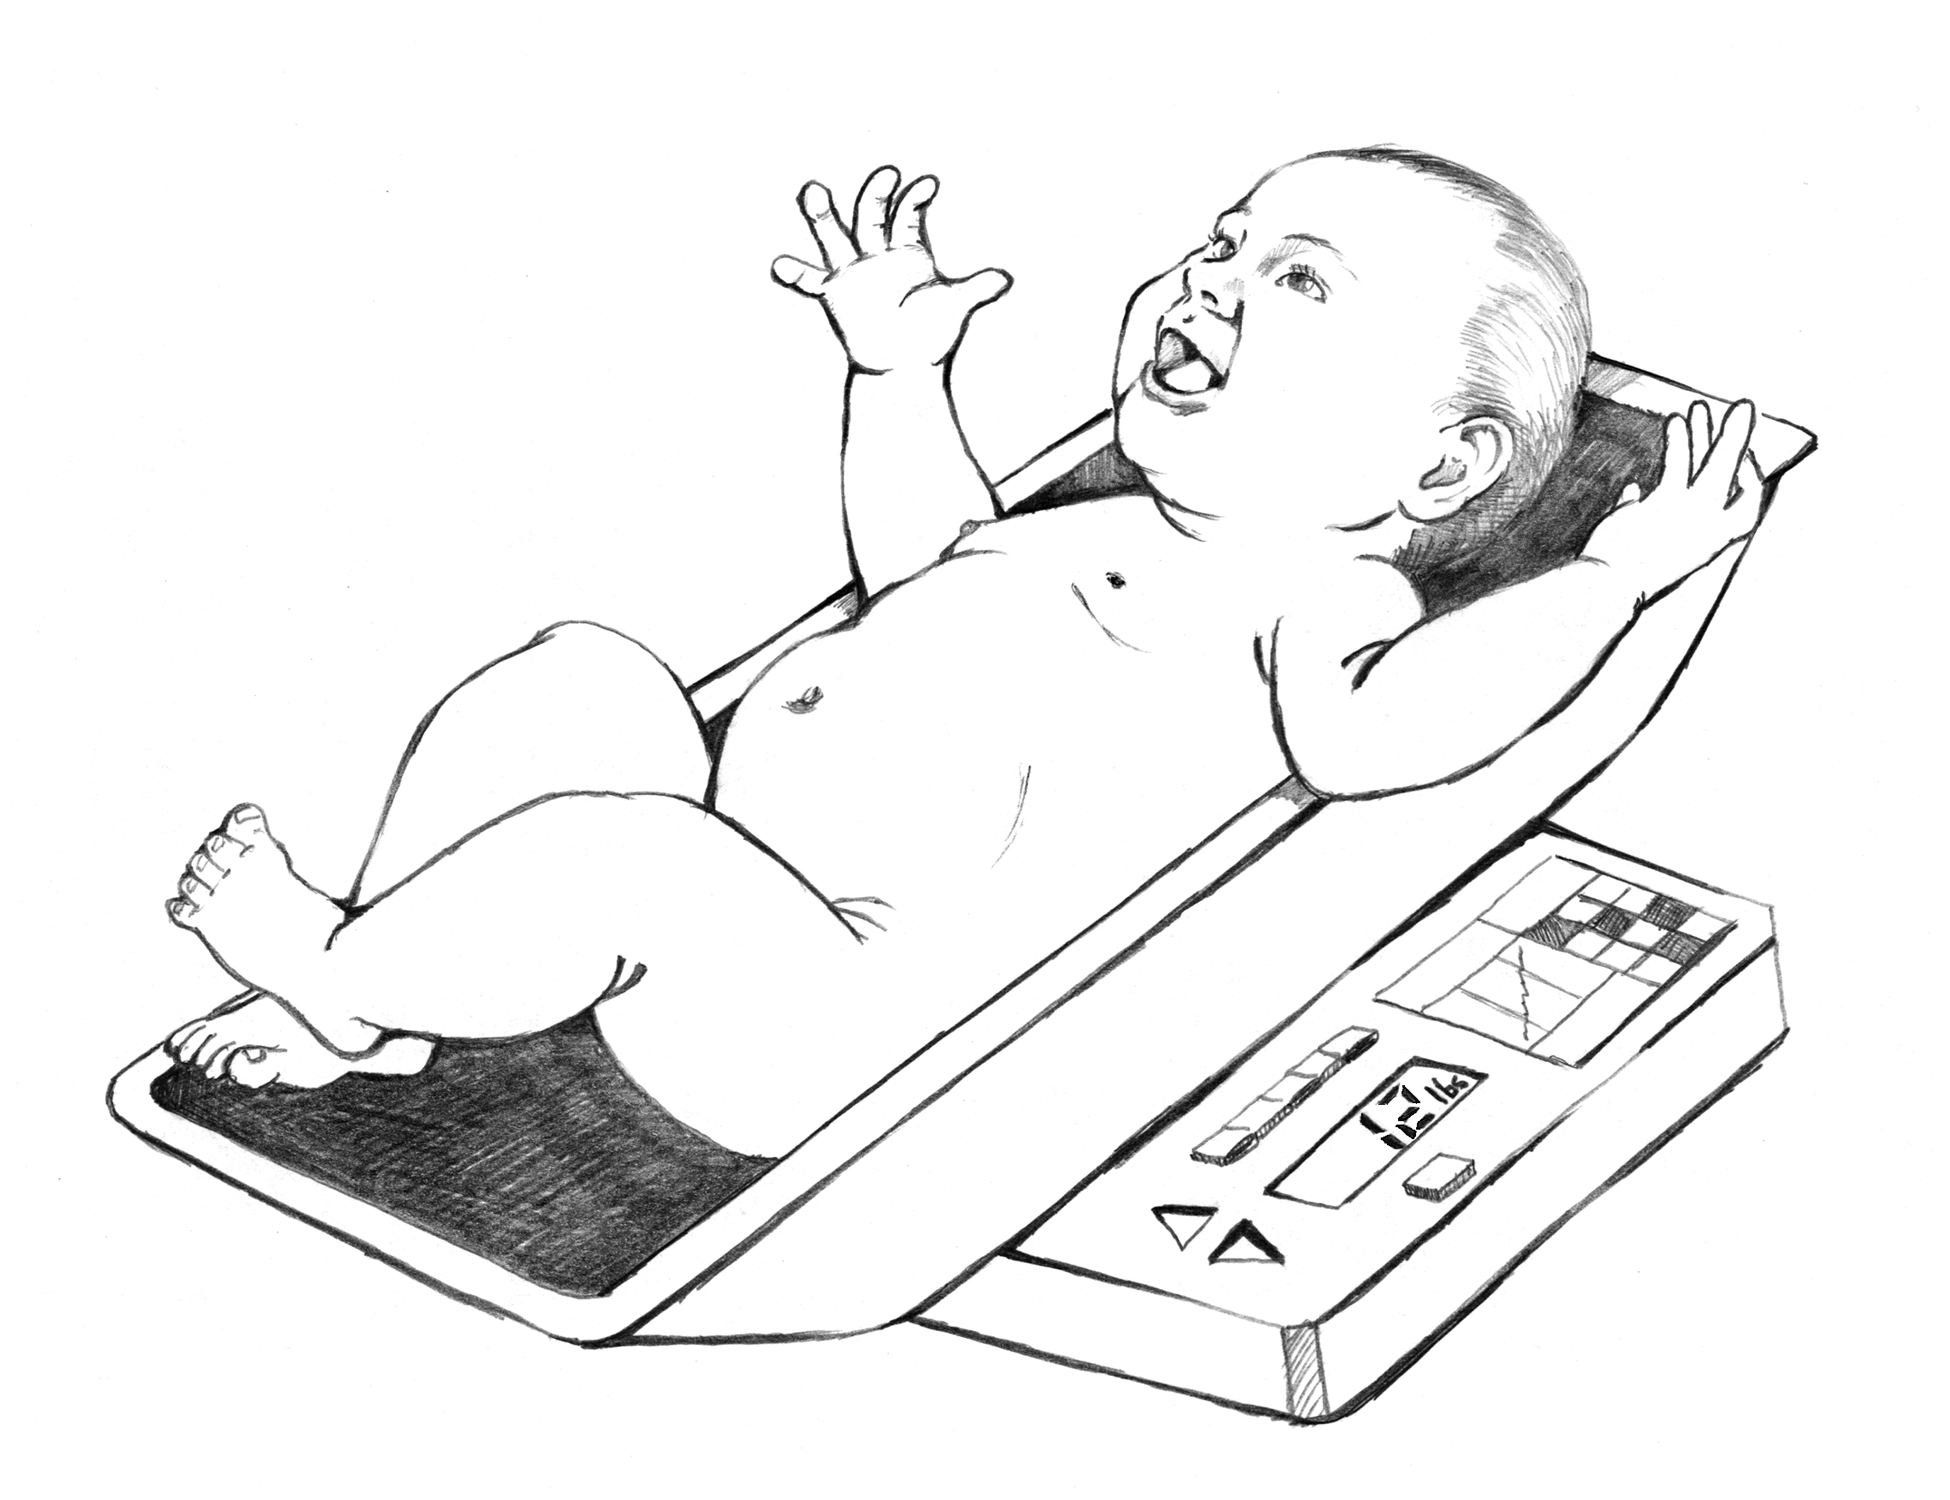 Scales Weighing Babies Kids, Scales Infant Baby